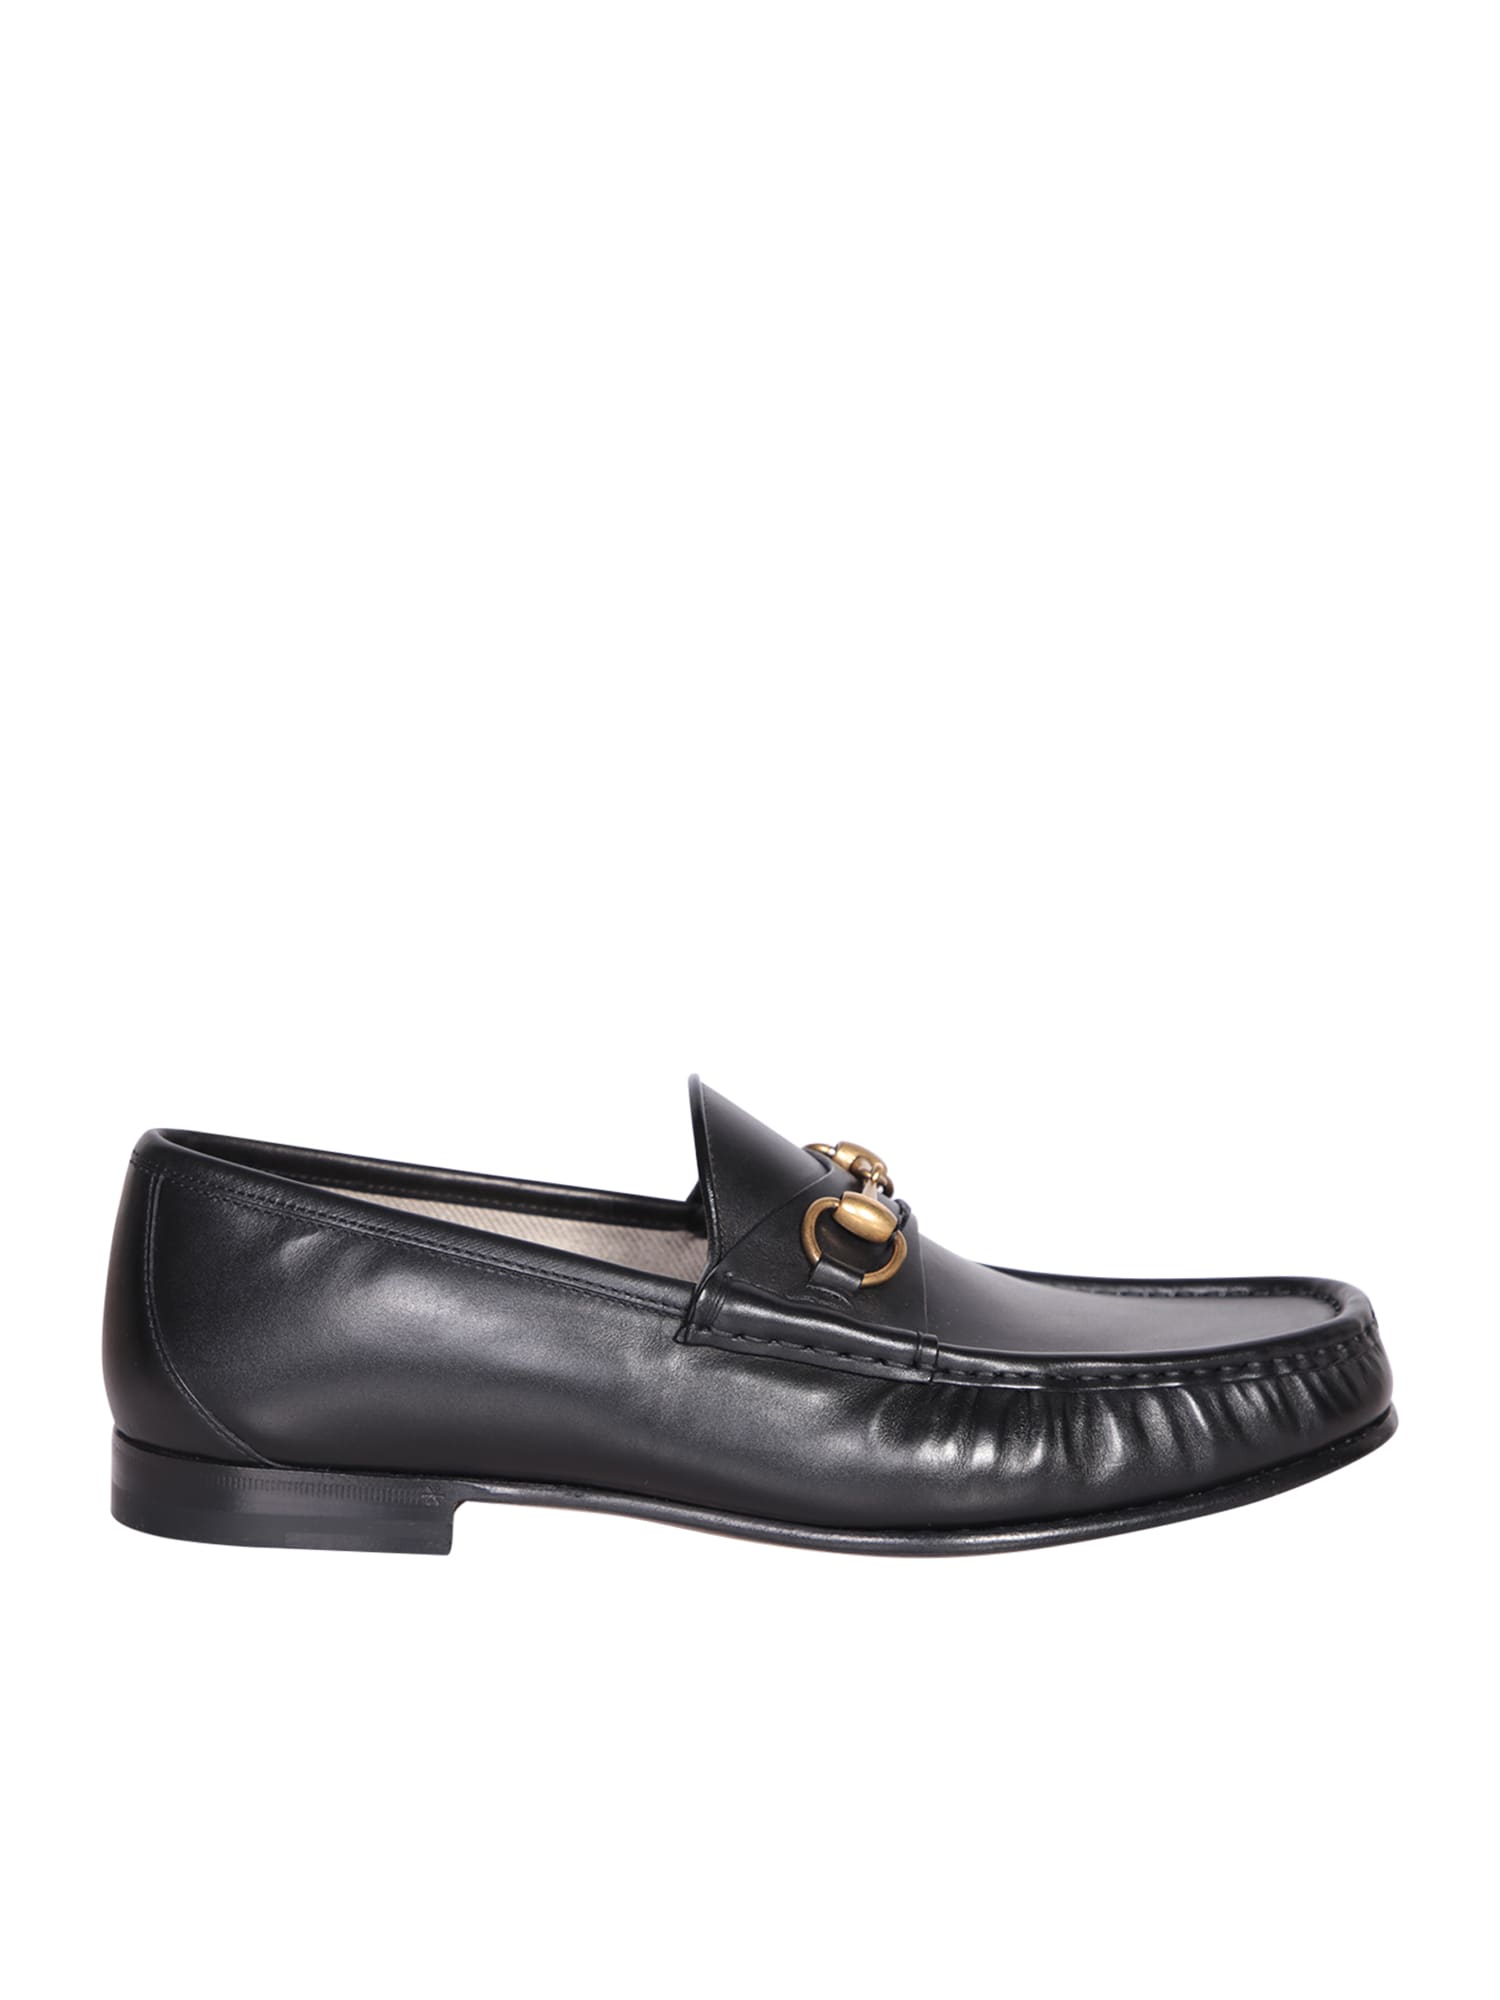 GUCCI 1953 LEATHER LOAFER